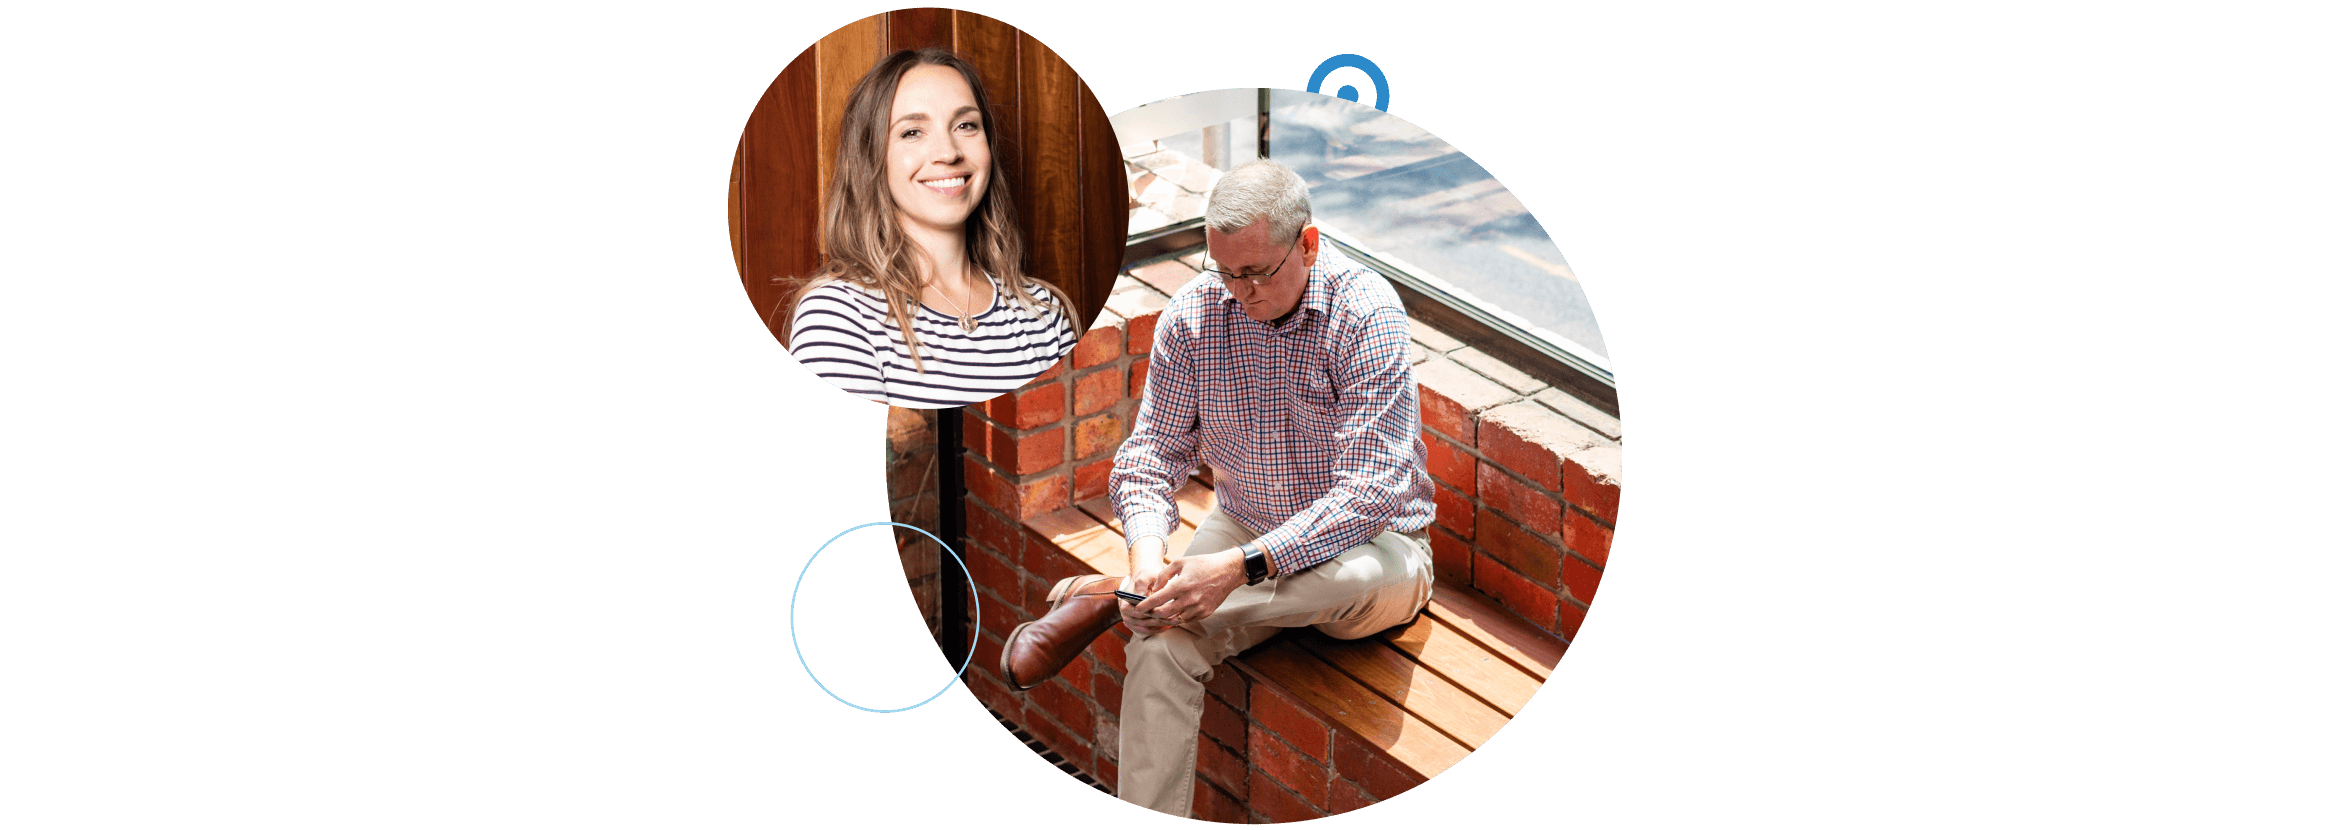 A small business owner sitting on a bench on their phone, beside an image of a Xero partner advisor. 